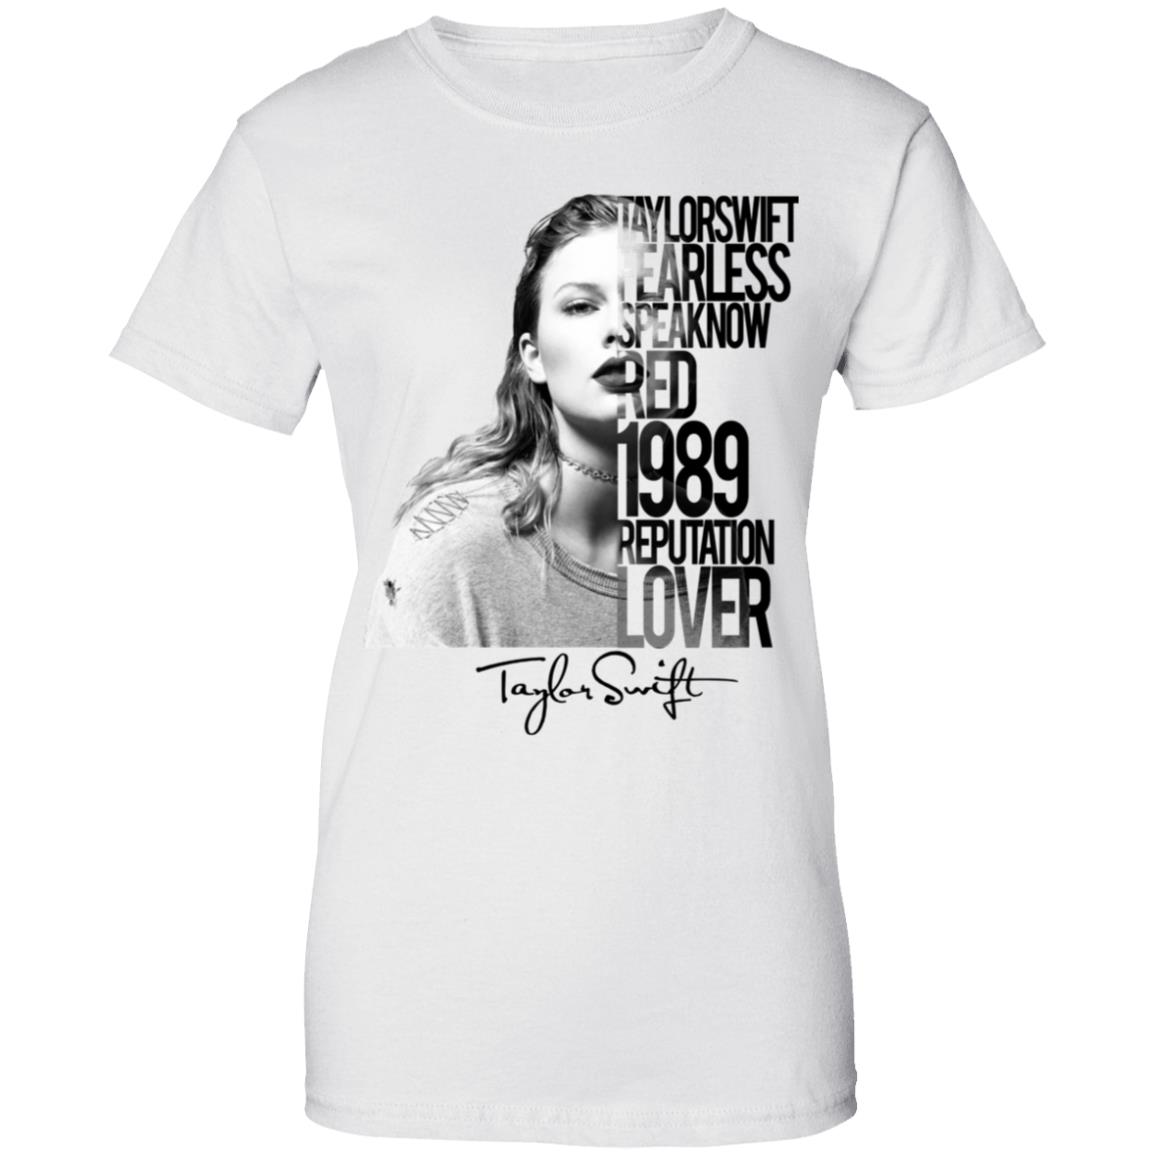 Taylor Swift fearless speak now red 1989 reputation lover hoodie, t shirt.